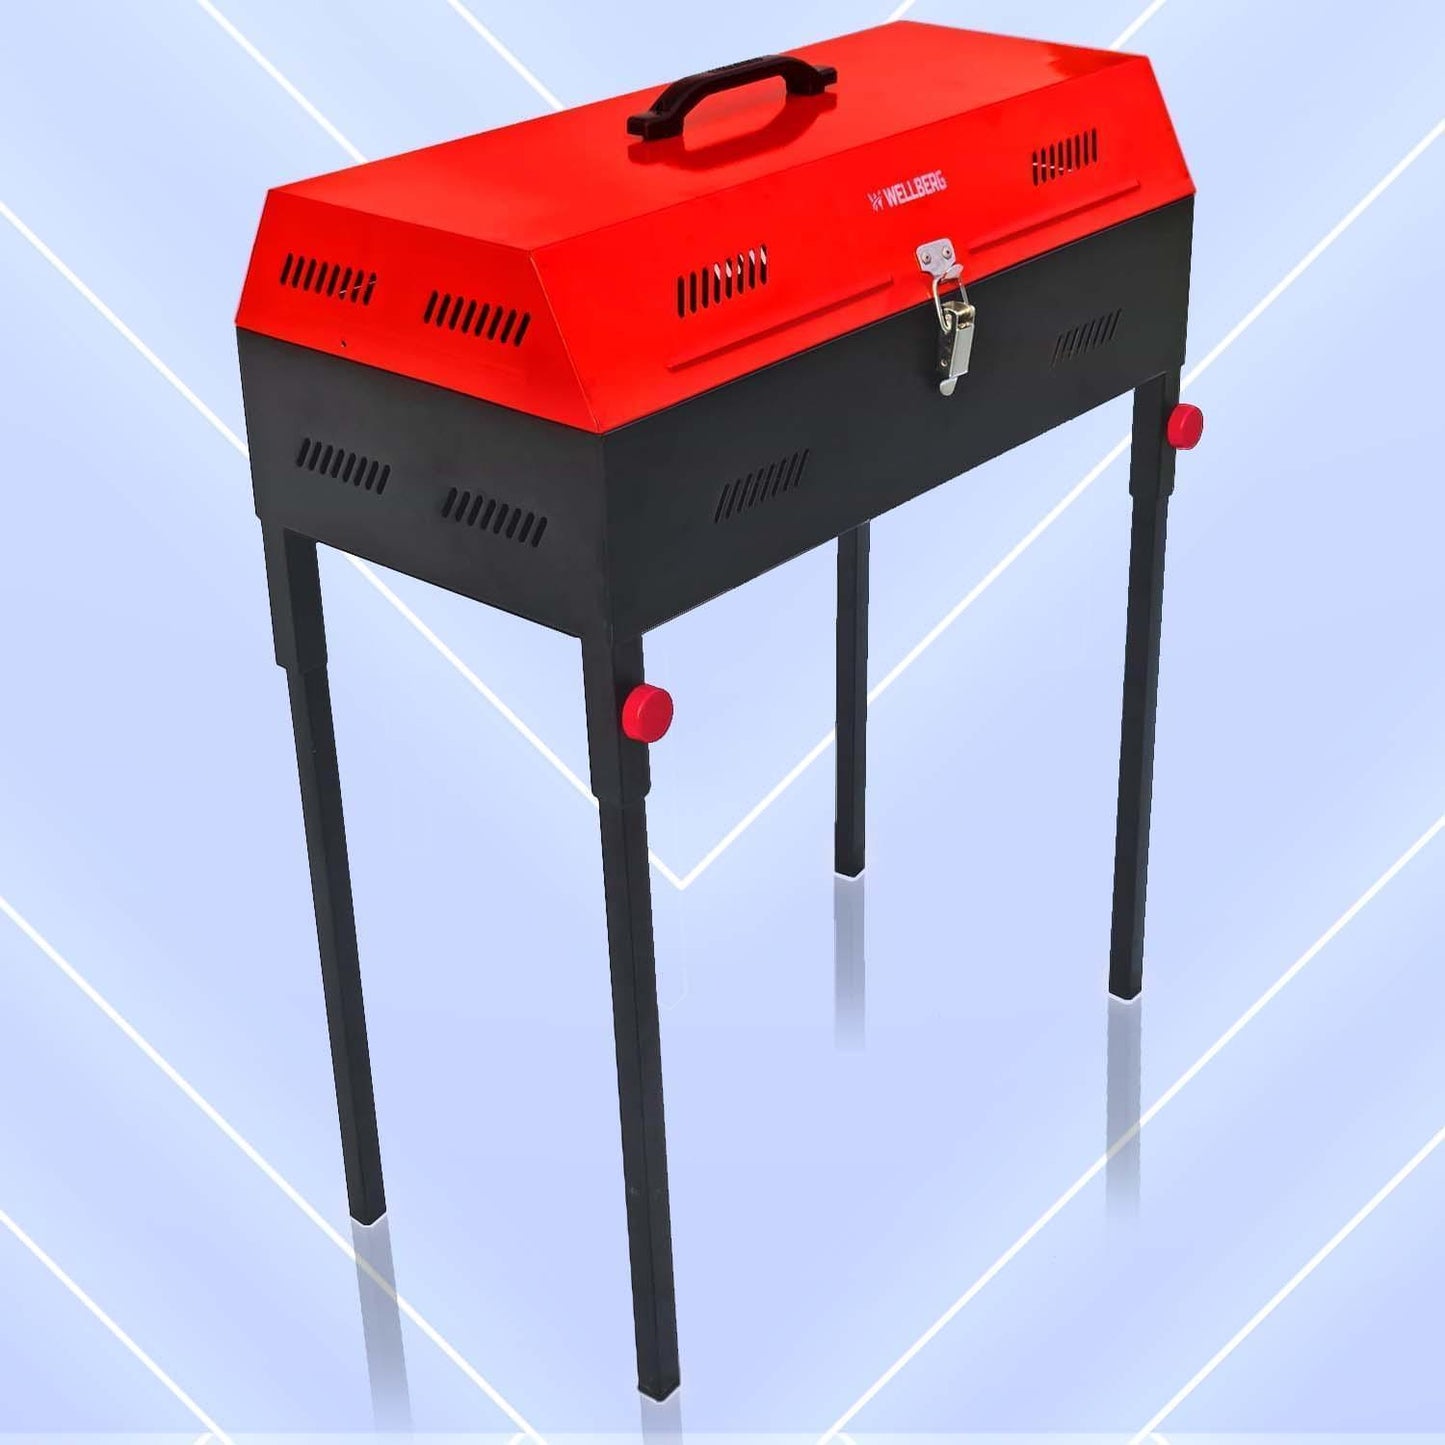 Wellberg Premium Xl Charcoal Barbeque Grill With Lid ( Red ) - WELLBERG